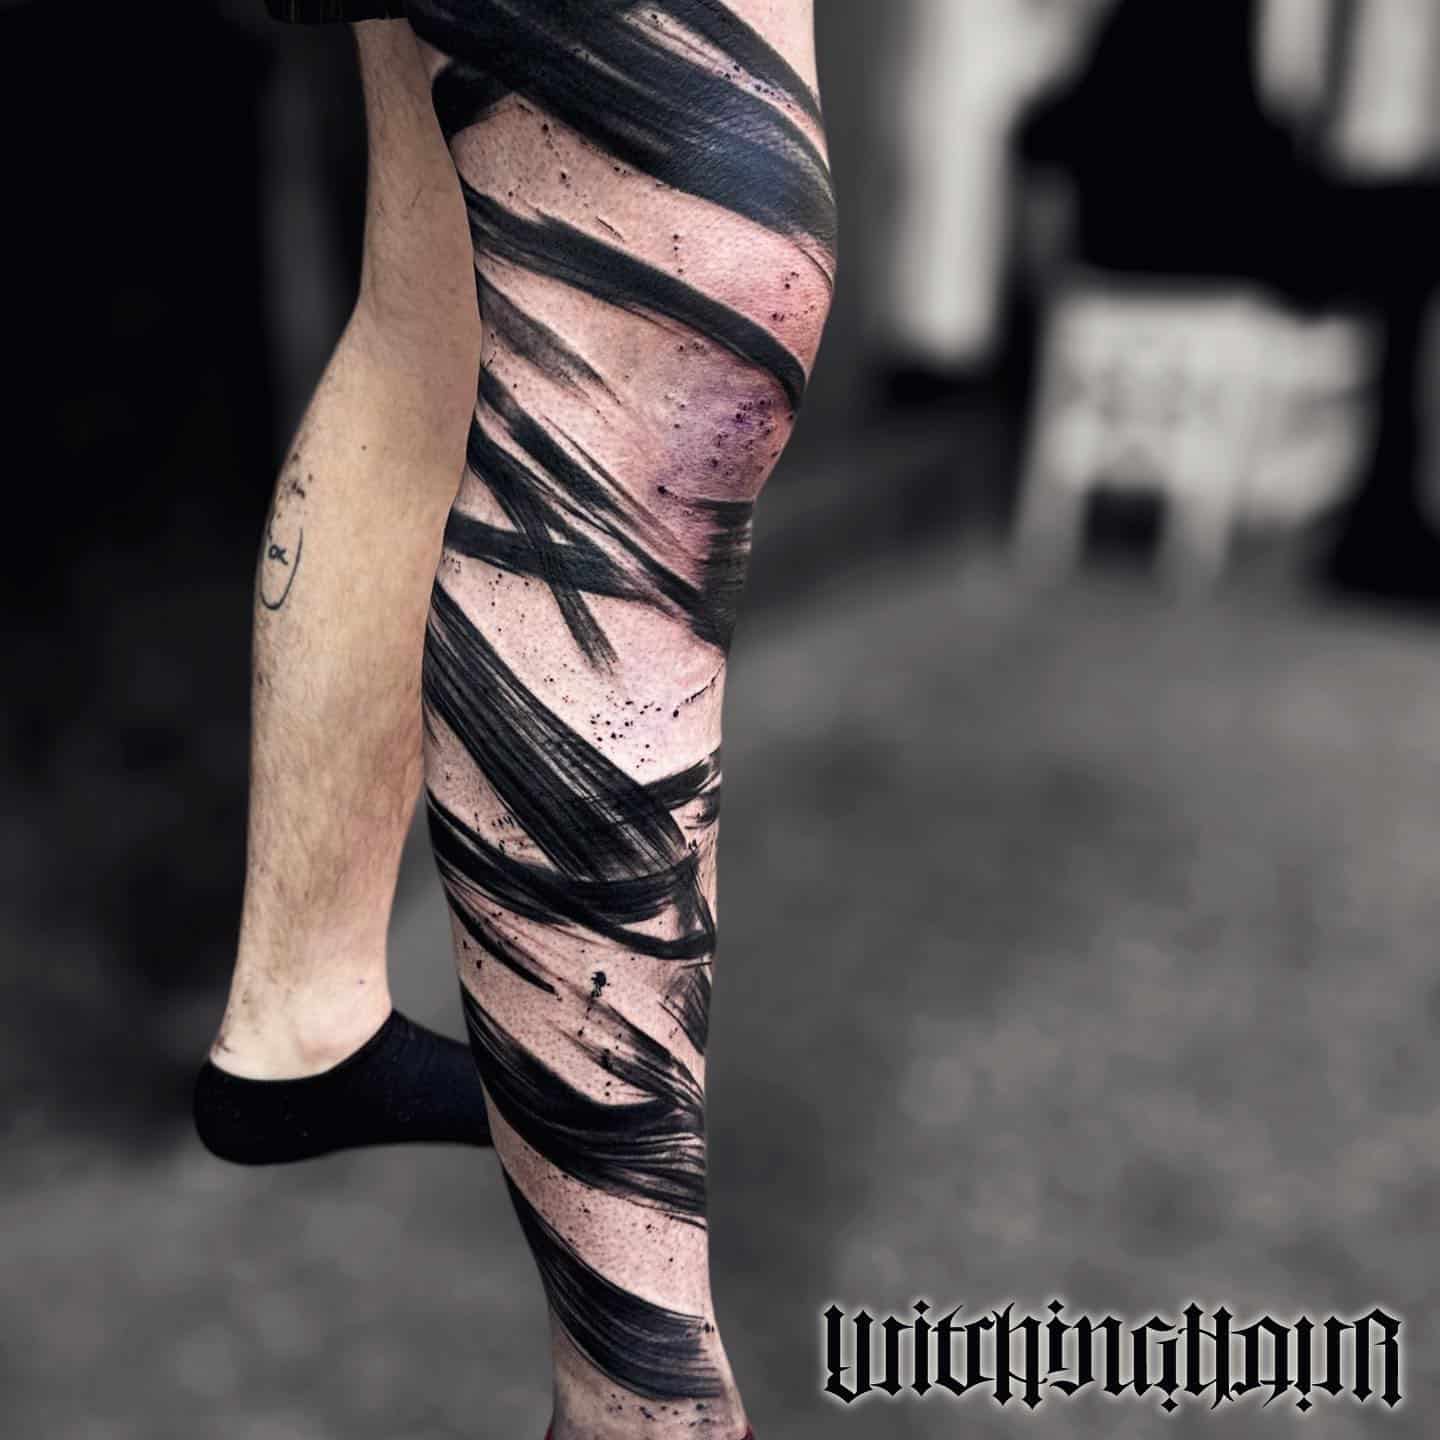 Abstrcat tattoofor men by witchinghournl